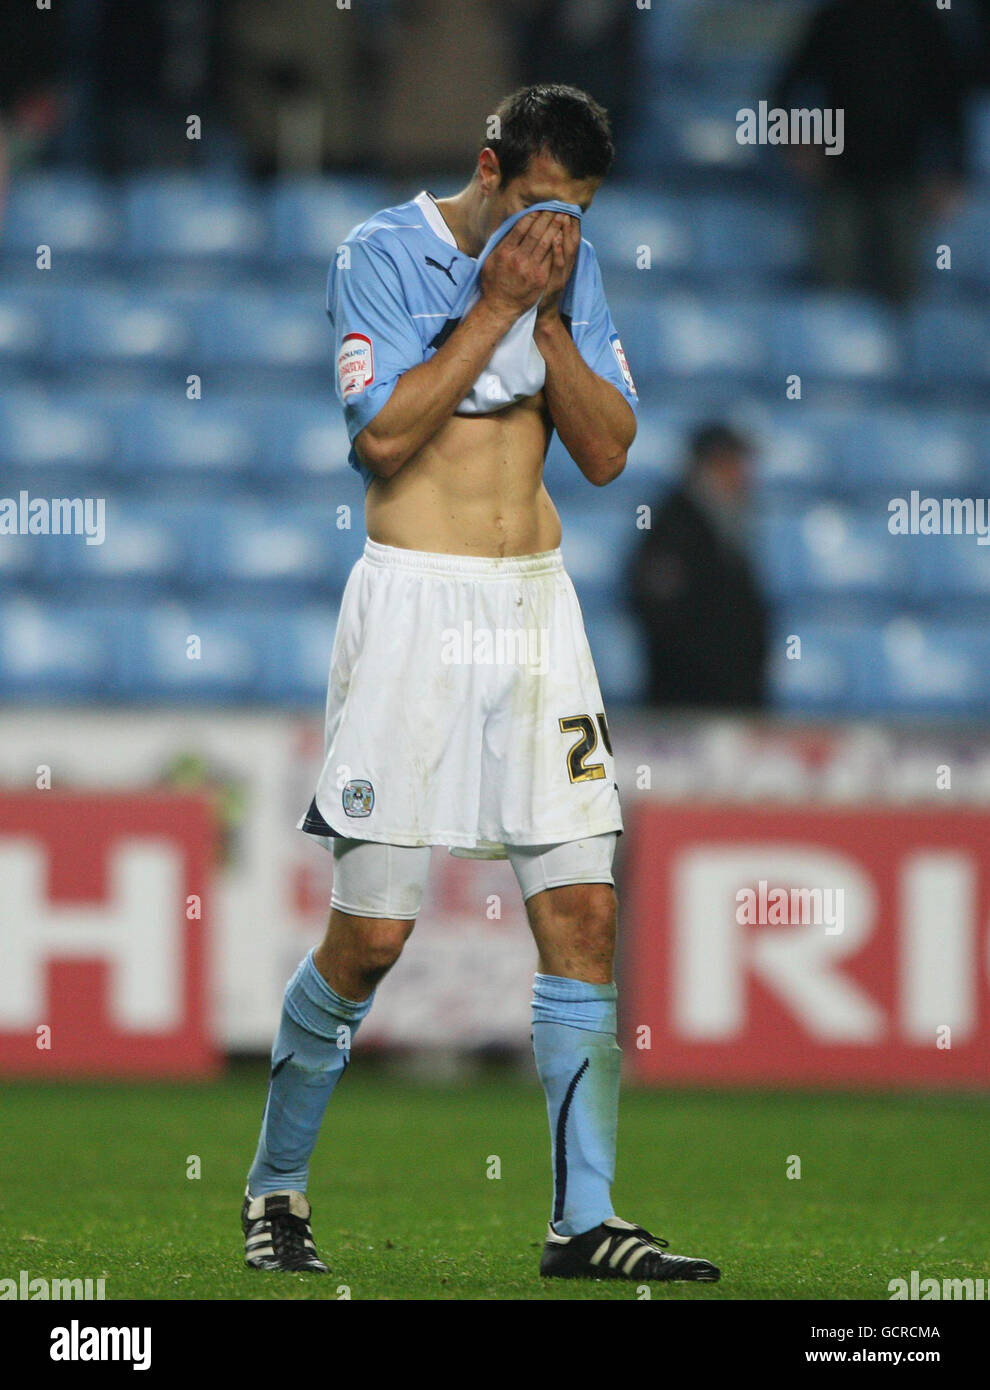 Coventry City defender Richard Keogh shows his dejection after 2-1 defeat during the npower Championship match at the Ricoh Arena, Coventry. Stock Photo